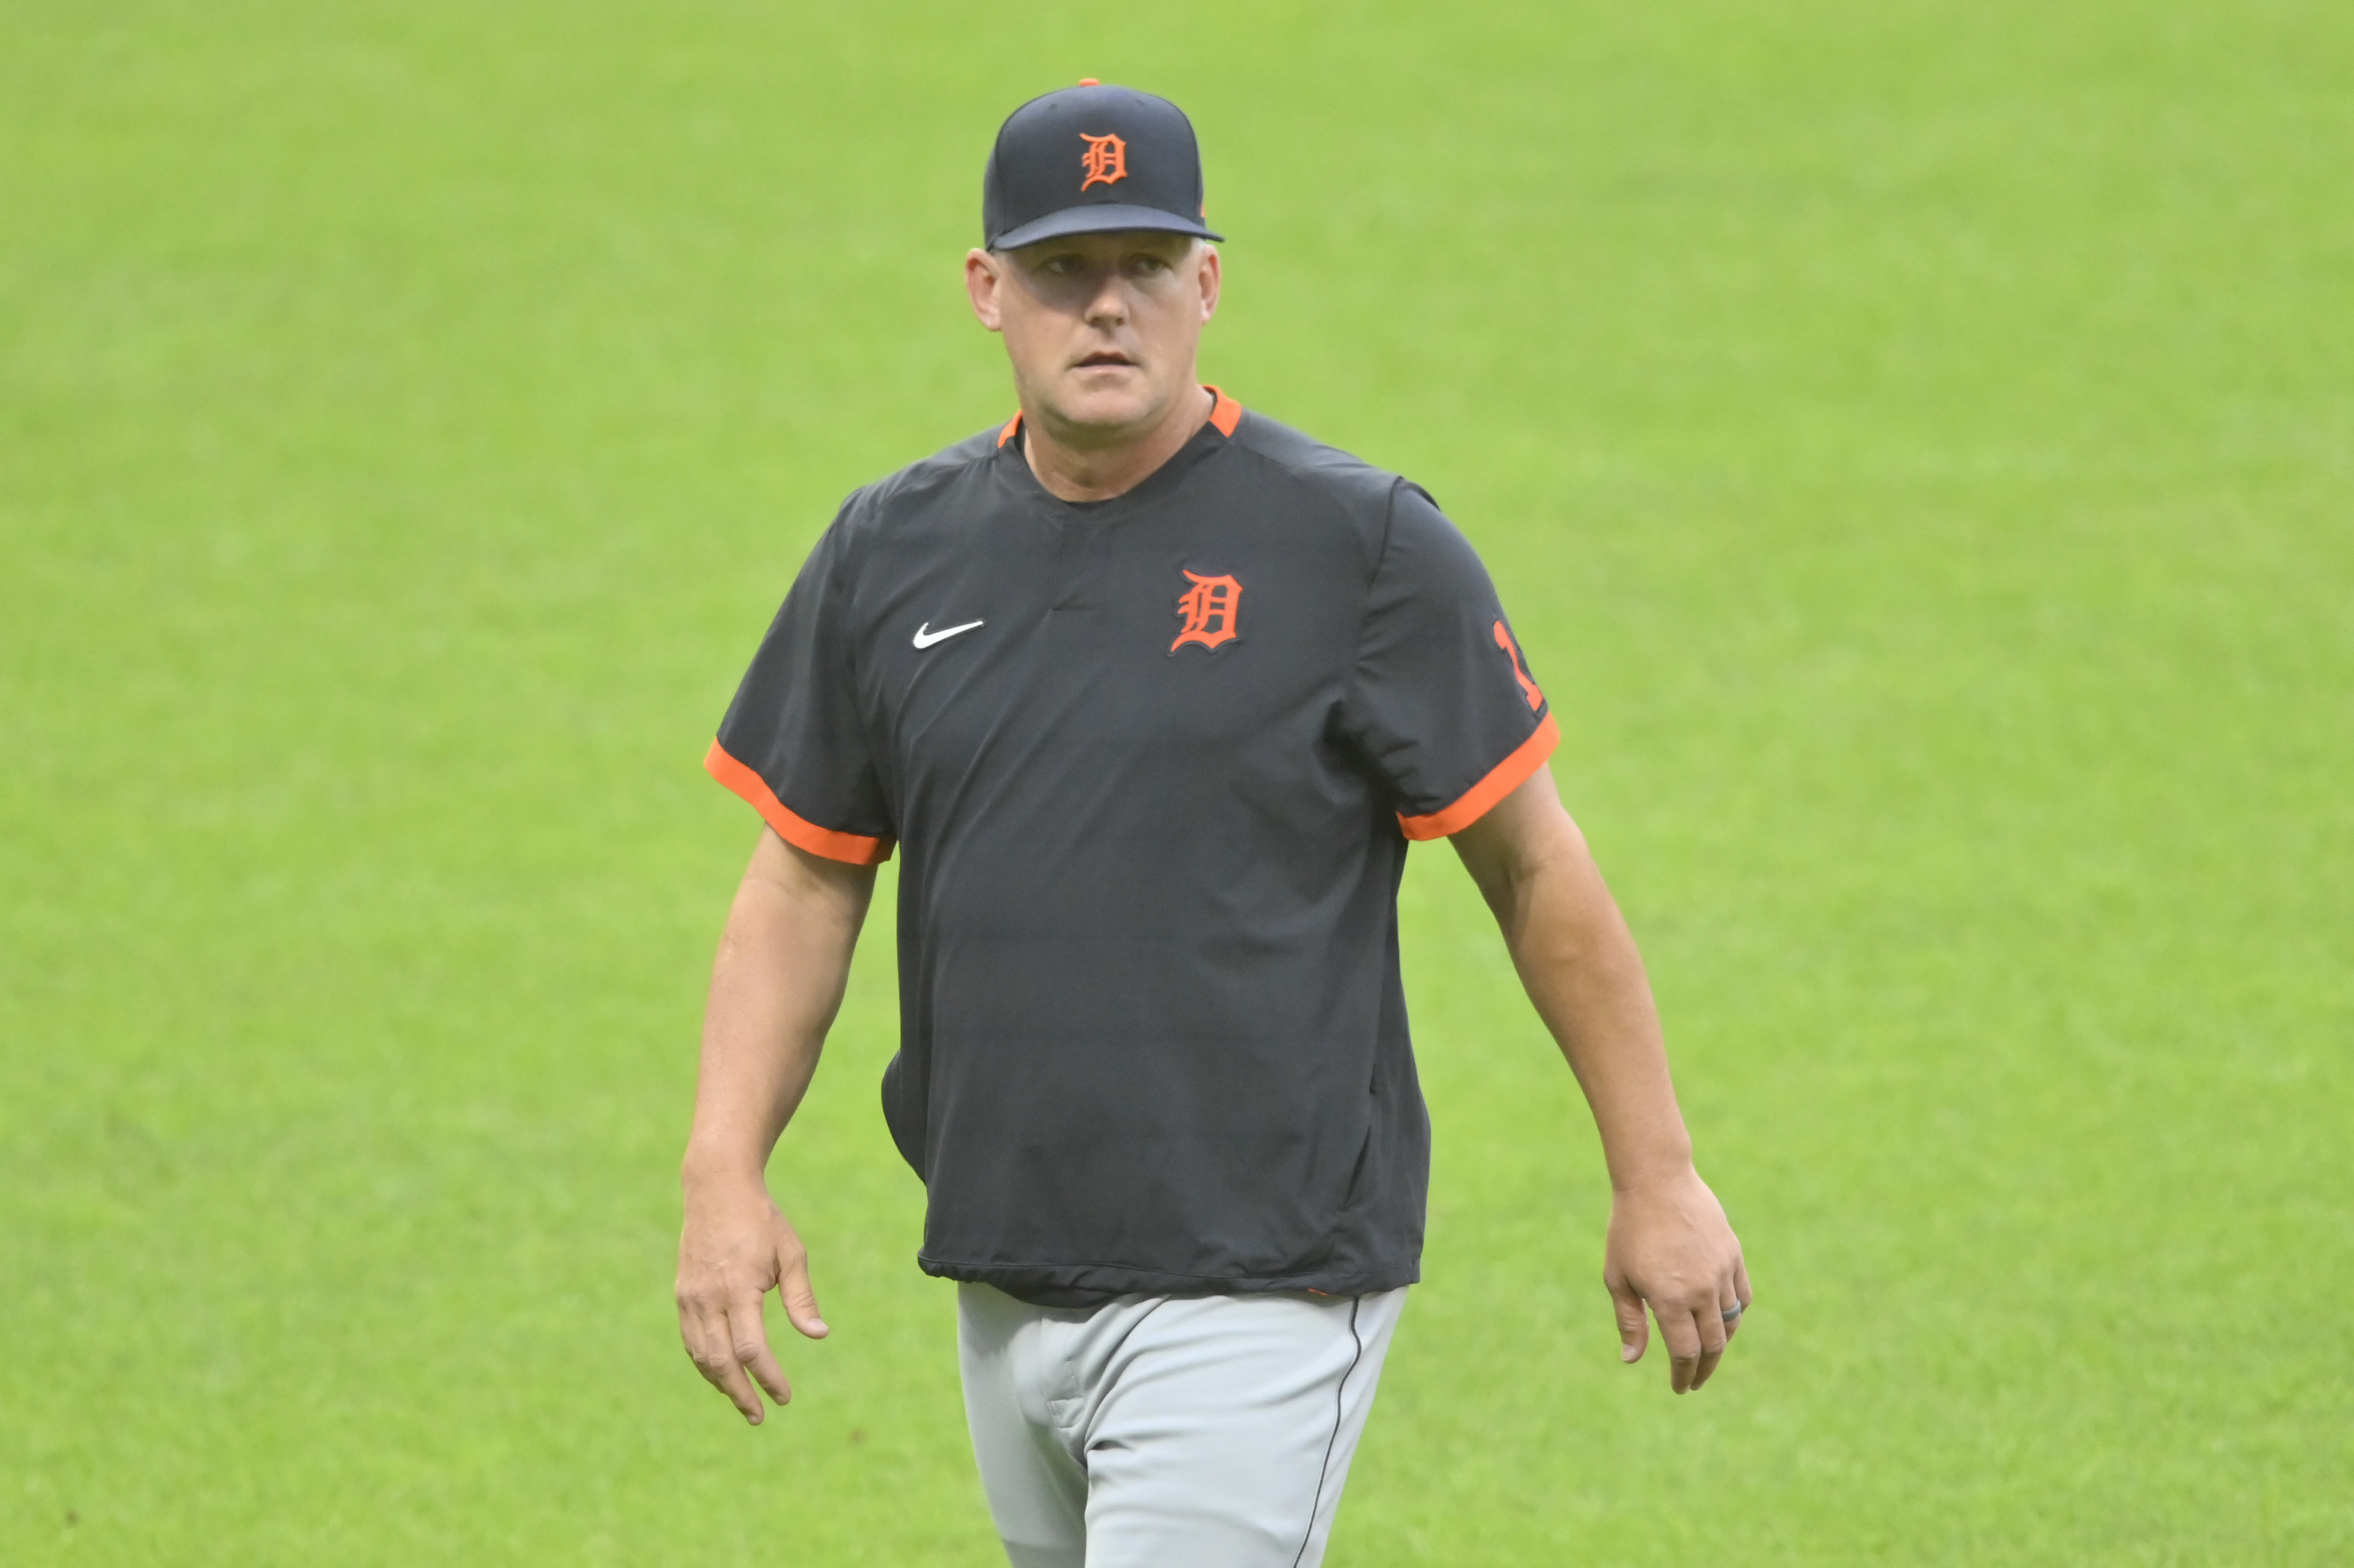 Detroit Tigers hire A.J. Hinch as new manager, Sports